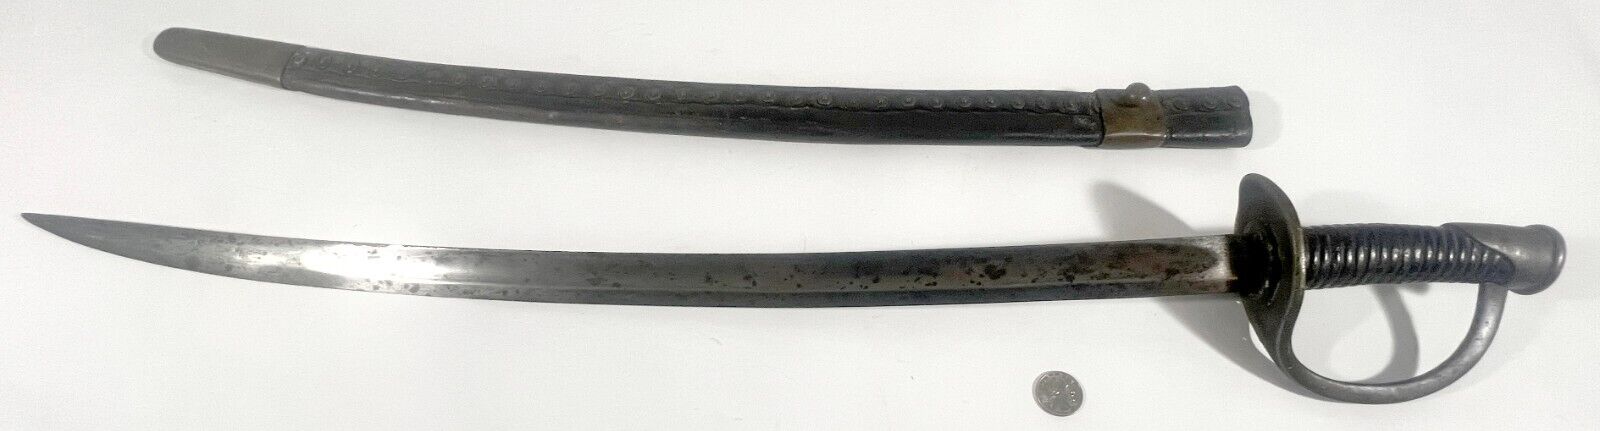 US naval cutlass, model 1860 with scabbard